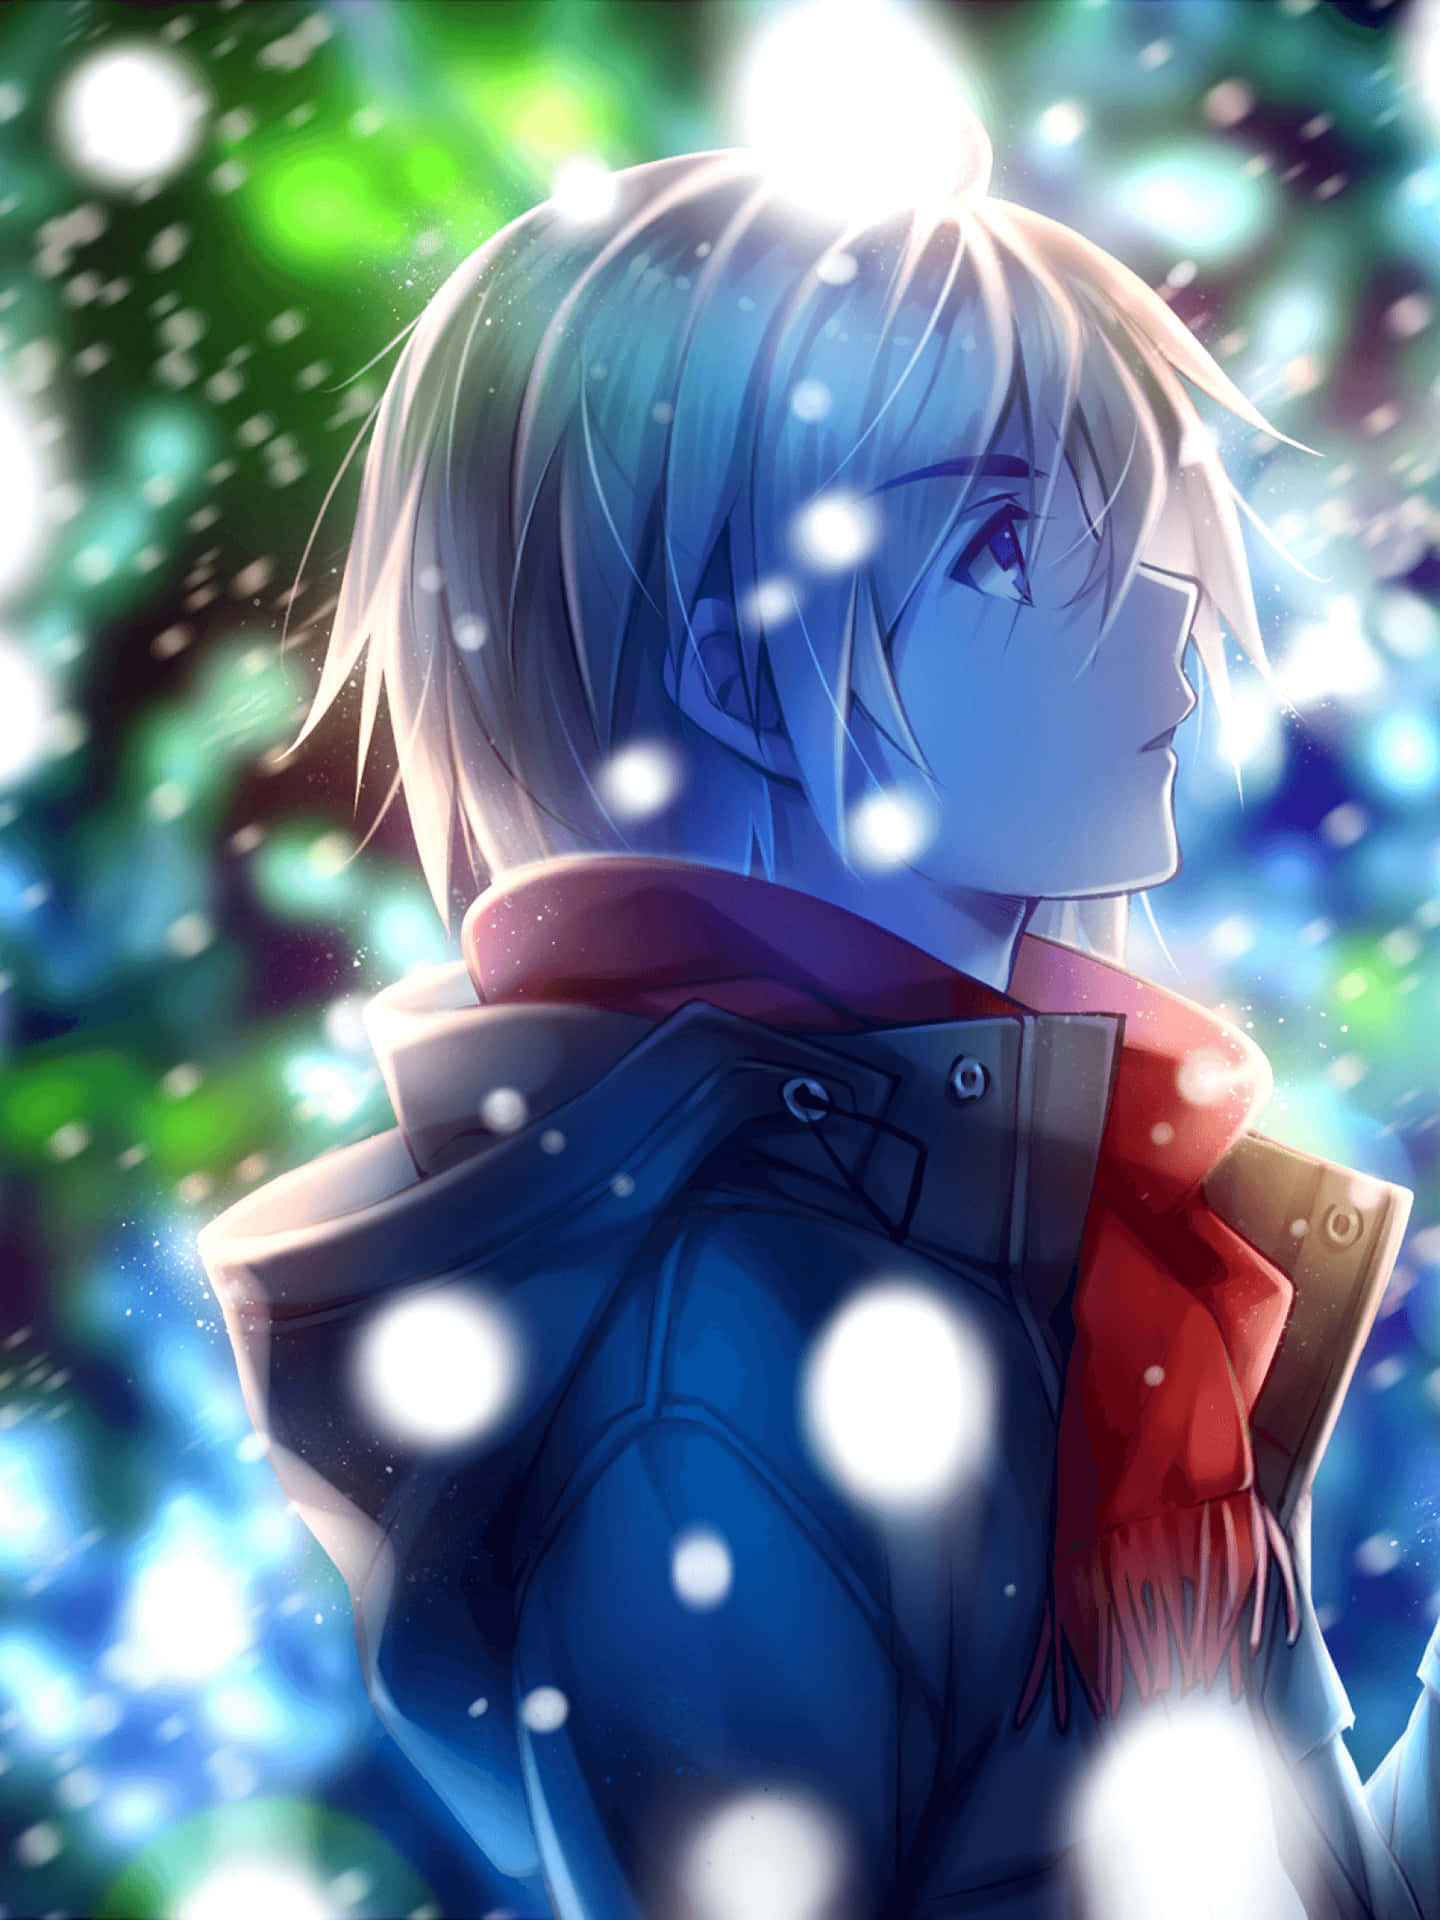 A Boy With Blue Hair And A Scarf Looking At The Snow